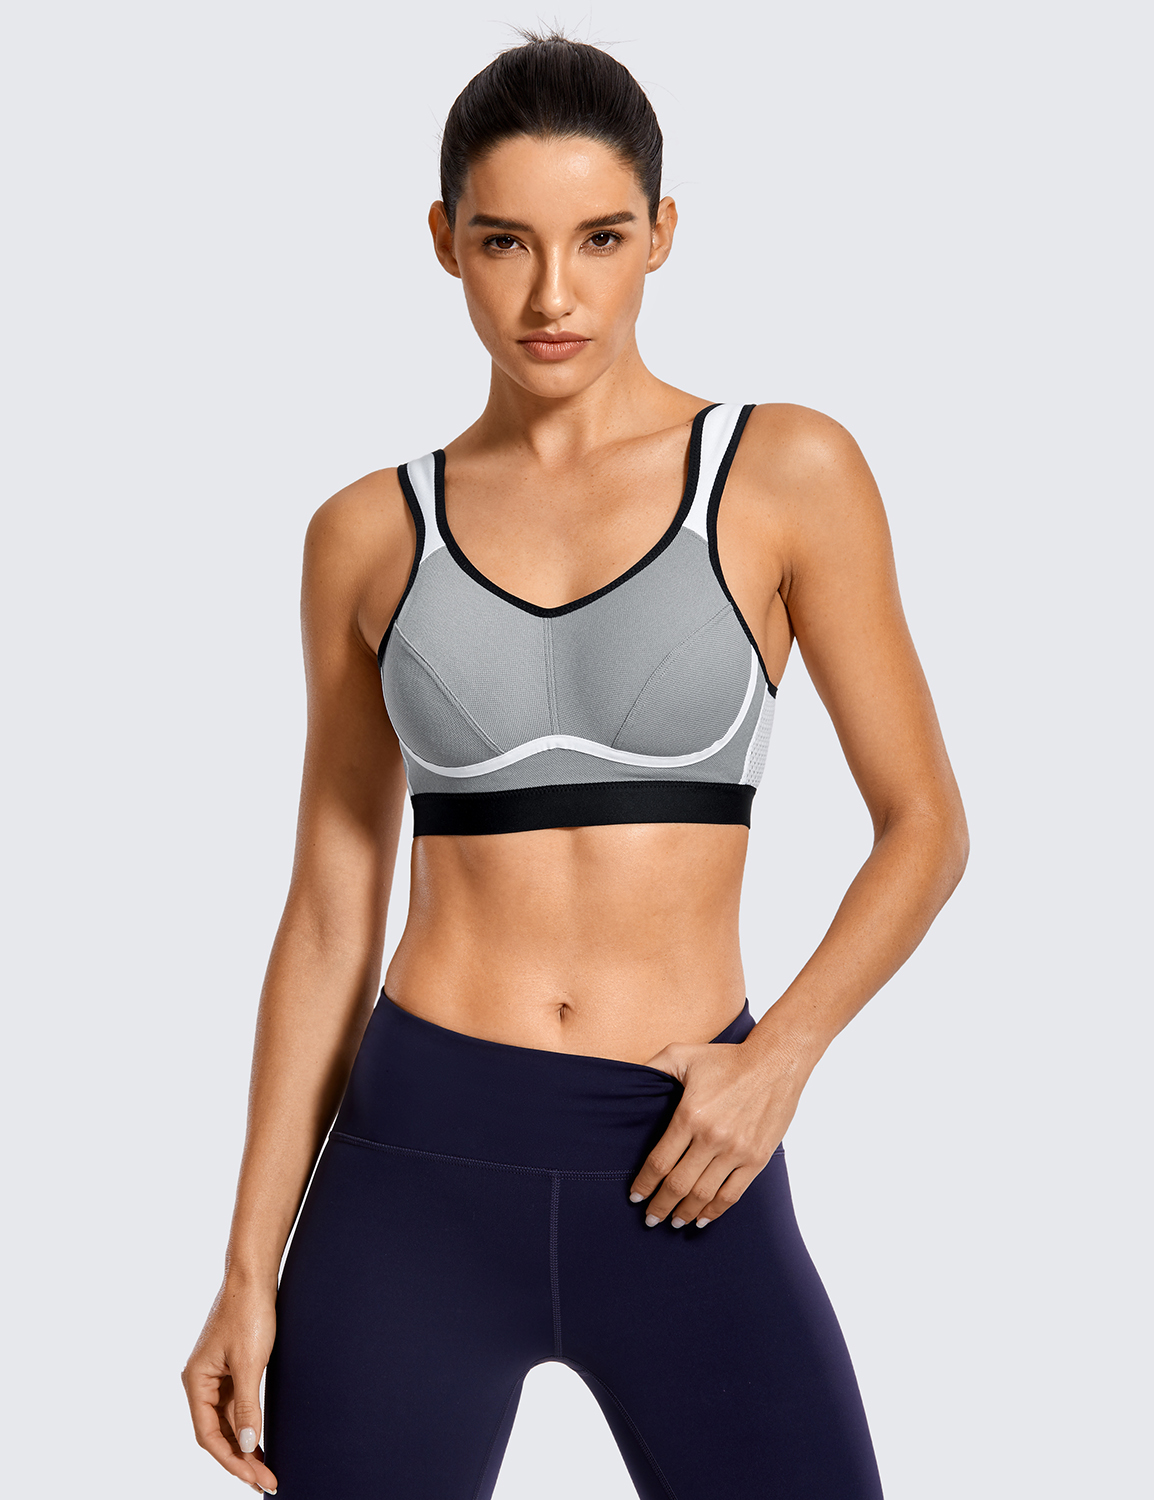 Plus size high impact bounce control non-padded wireless sports bra (S –  SSHK Shop by SS Online Trading Limited